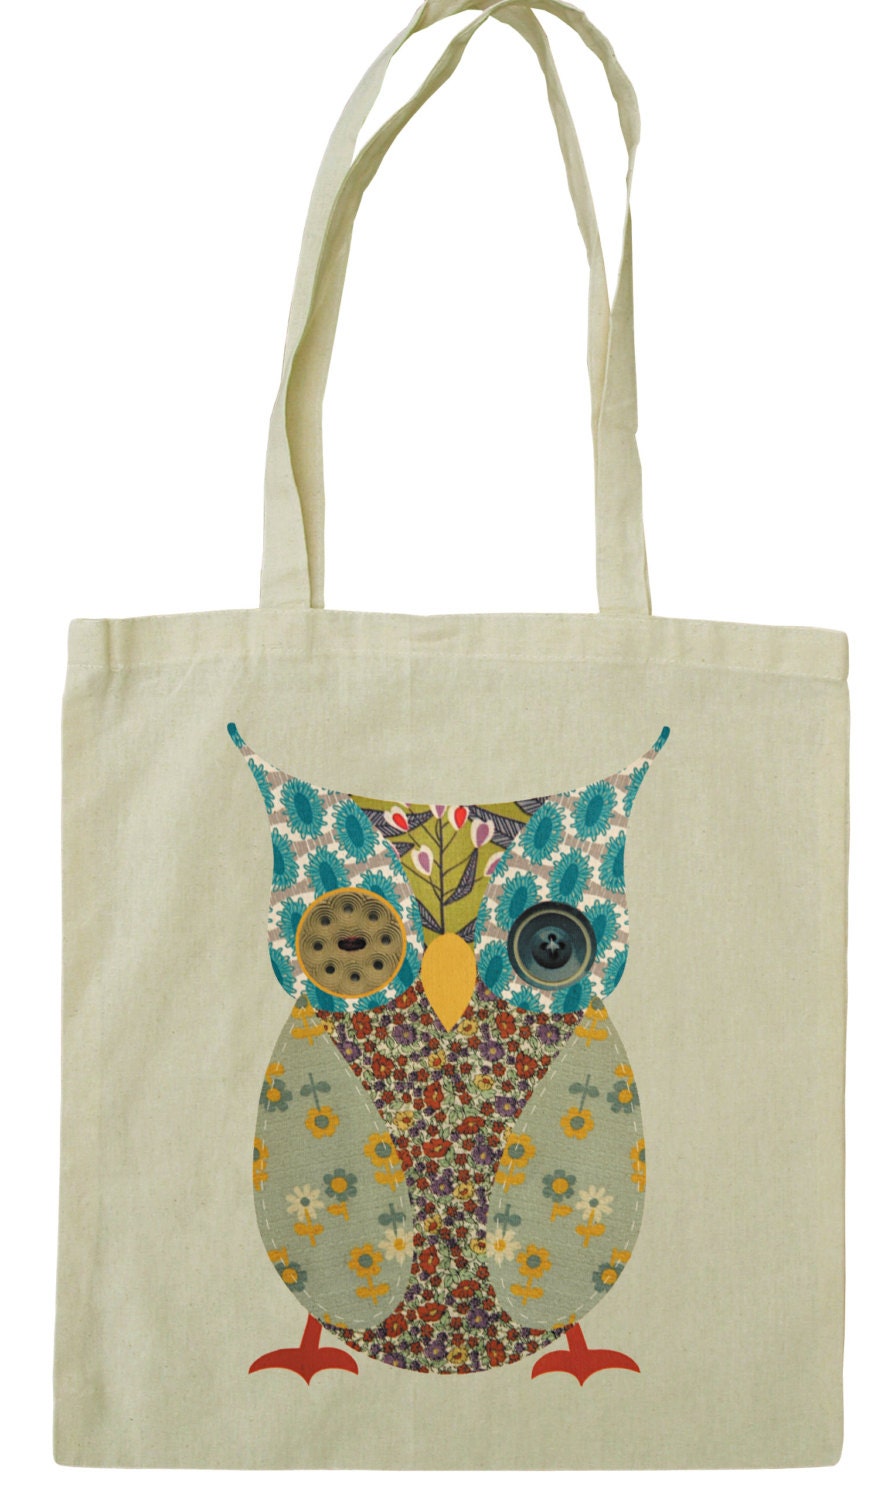 Cute owl cotton tote bag vintage fabric and button design